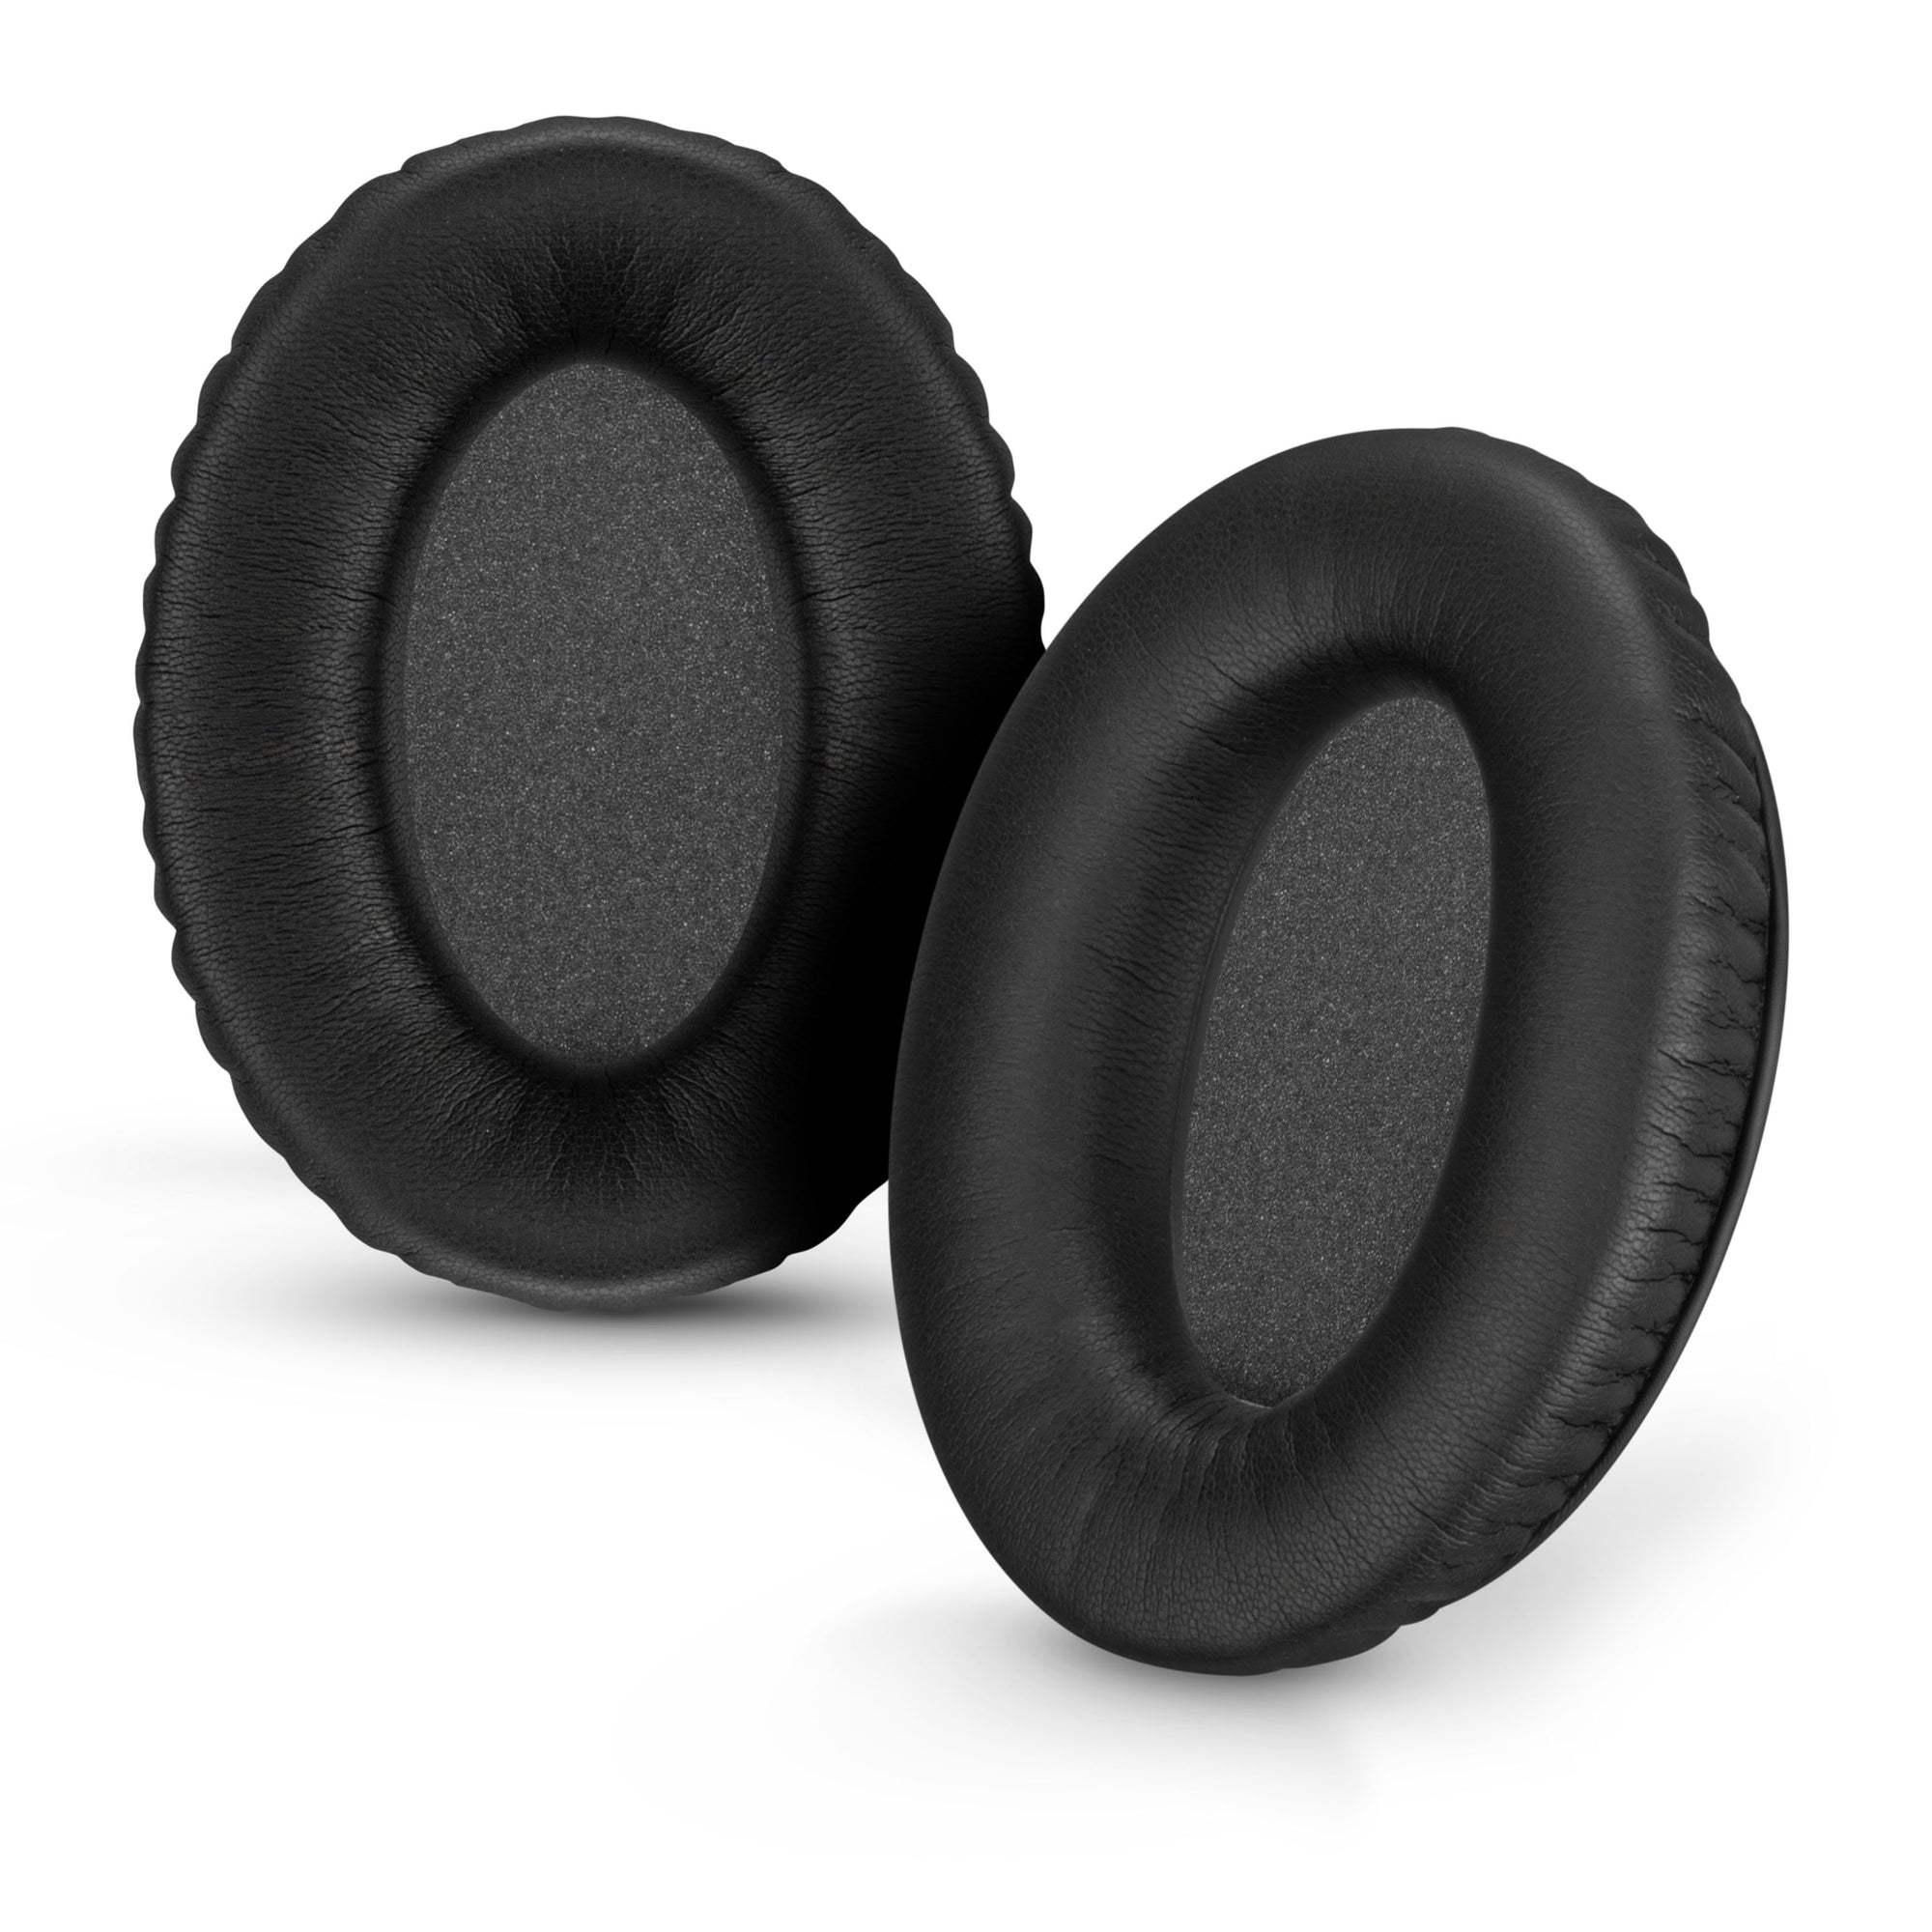 Replacement Earpads for BOSE Aviation A20 A10 X Headphones - Soft PU Leather & Memory Foam